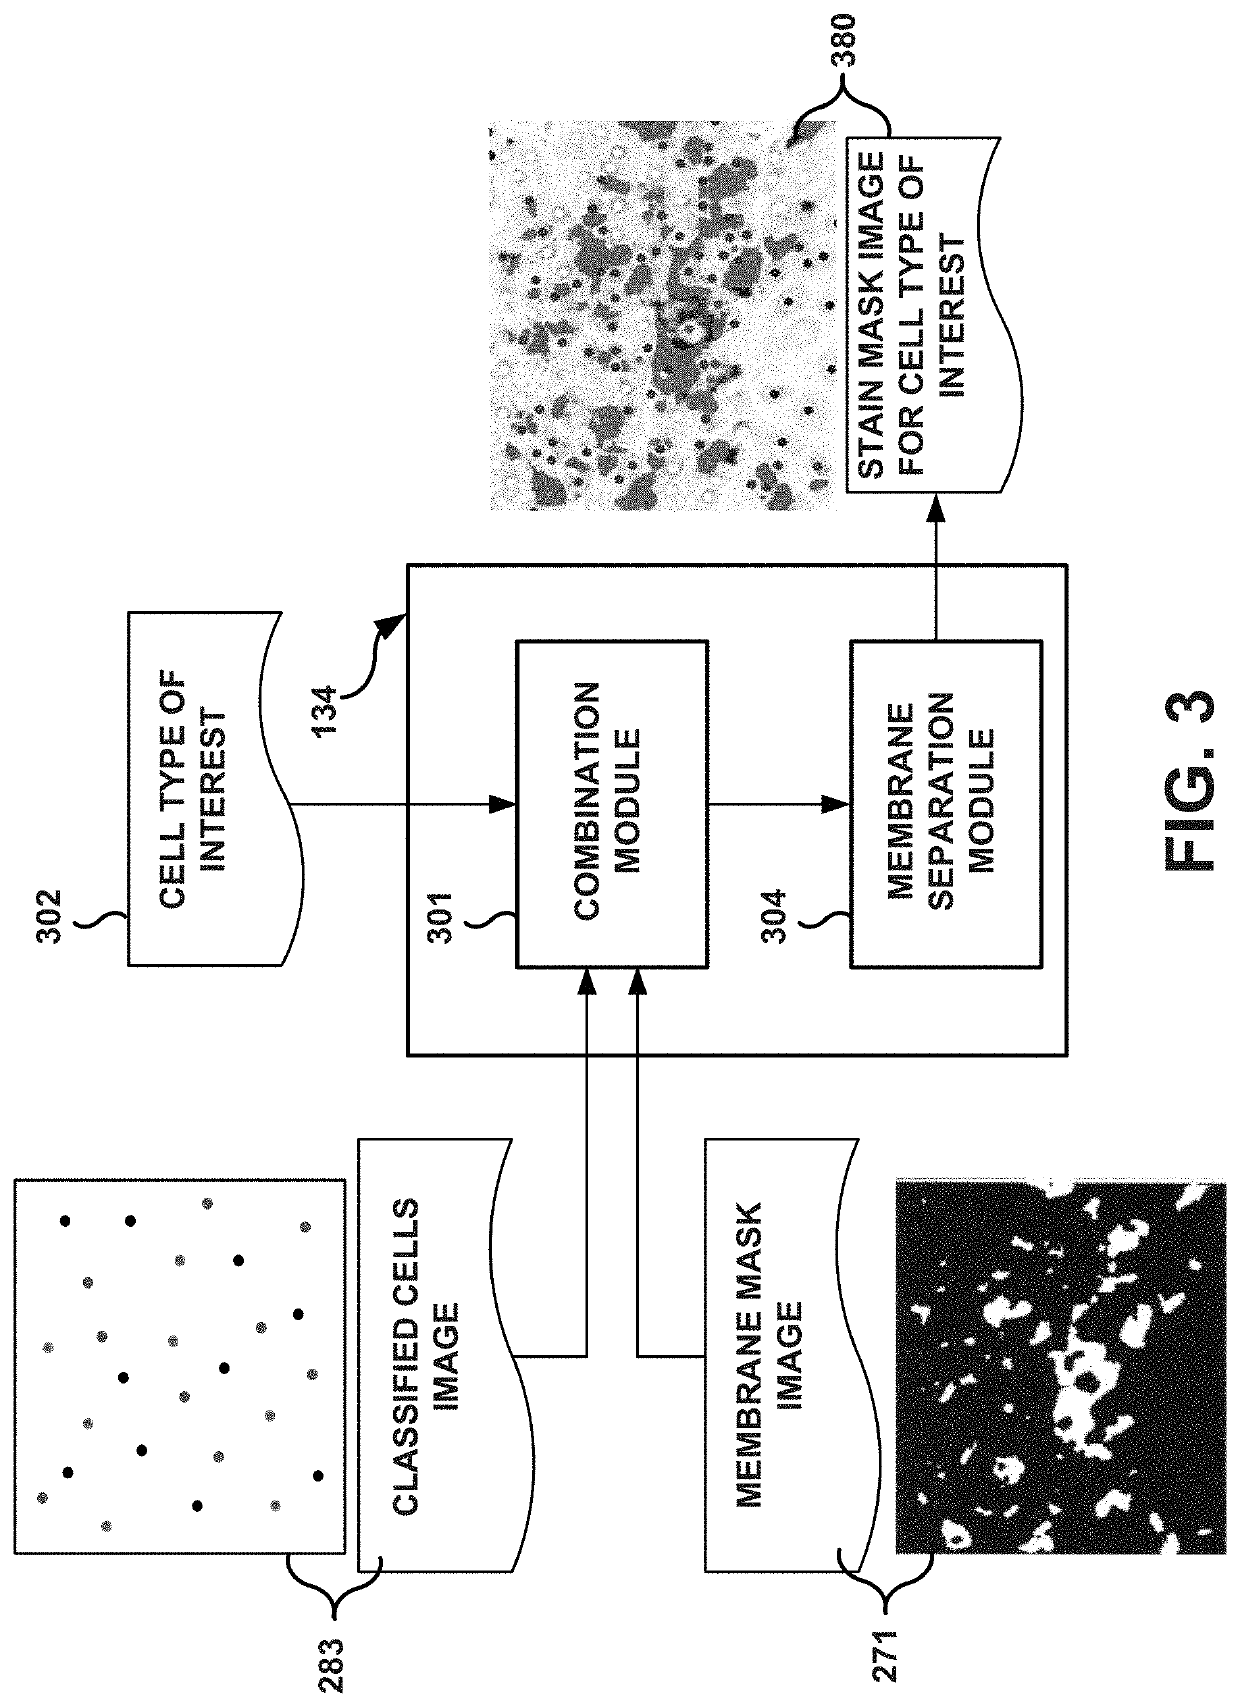 System and method for generating selective stain segmentation images for cell types of interest